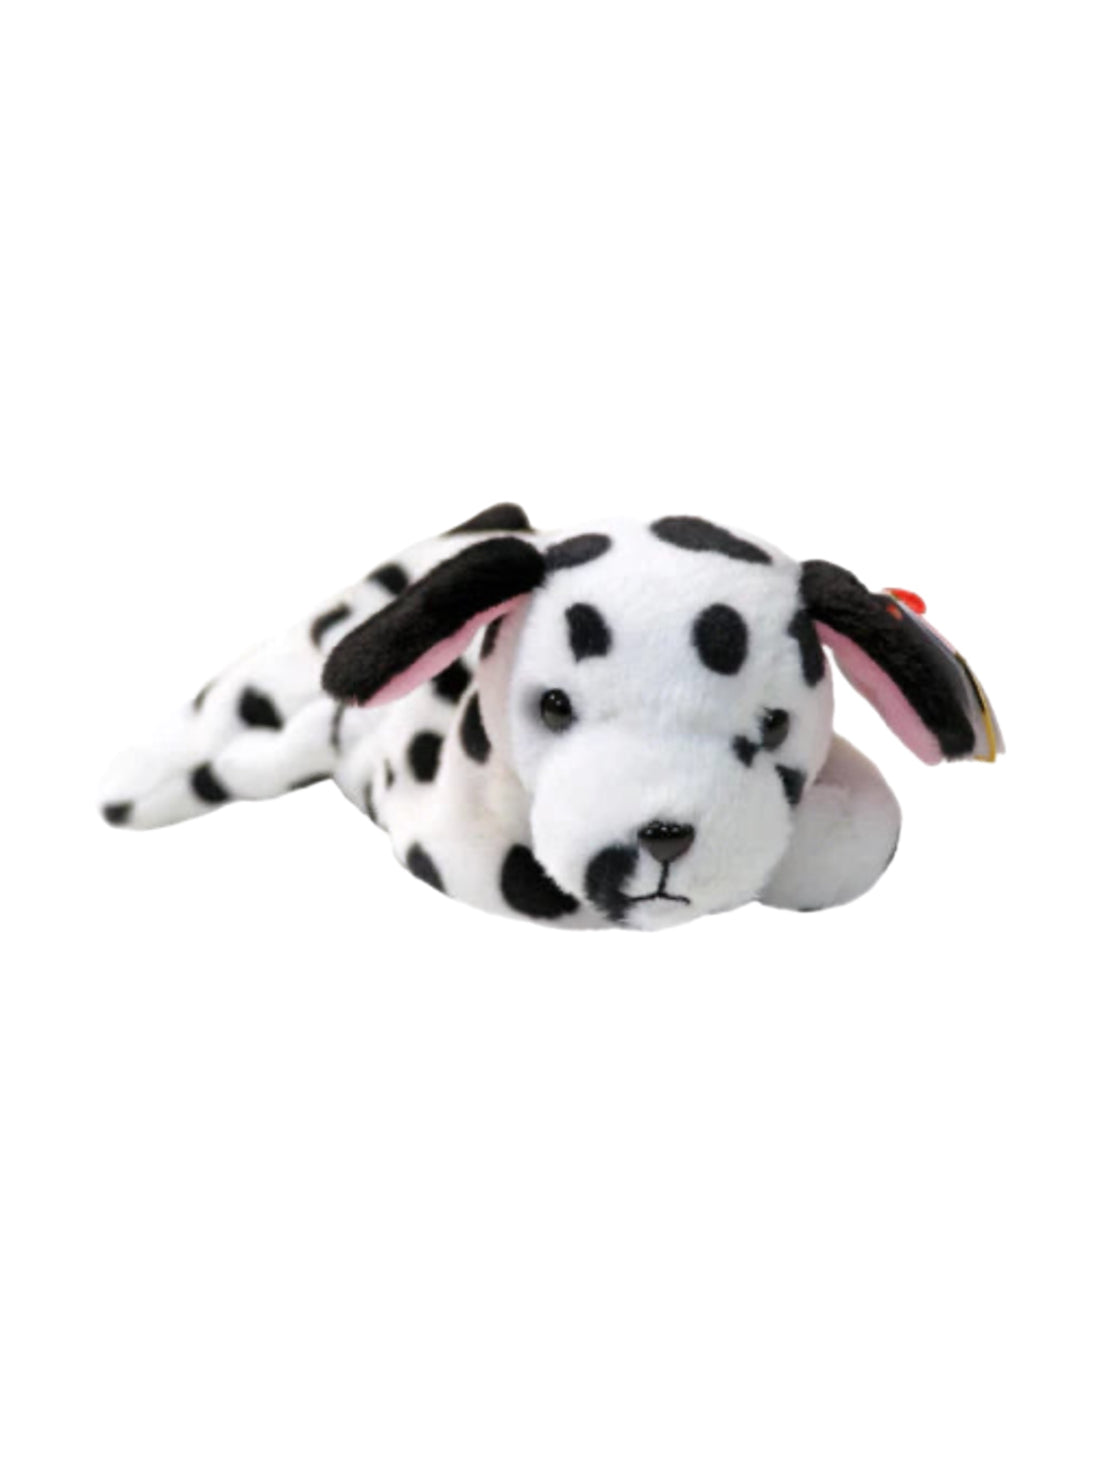 Ty Beanie Baby 30th Anniversary Limited Edition - Dotty II